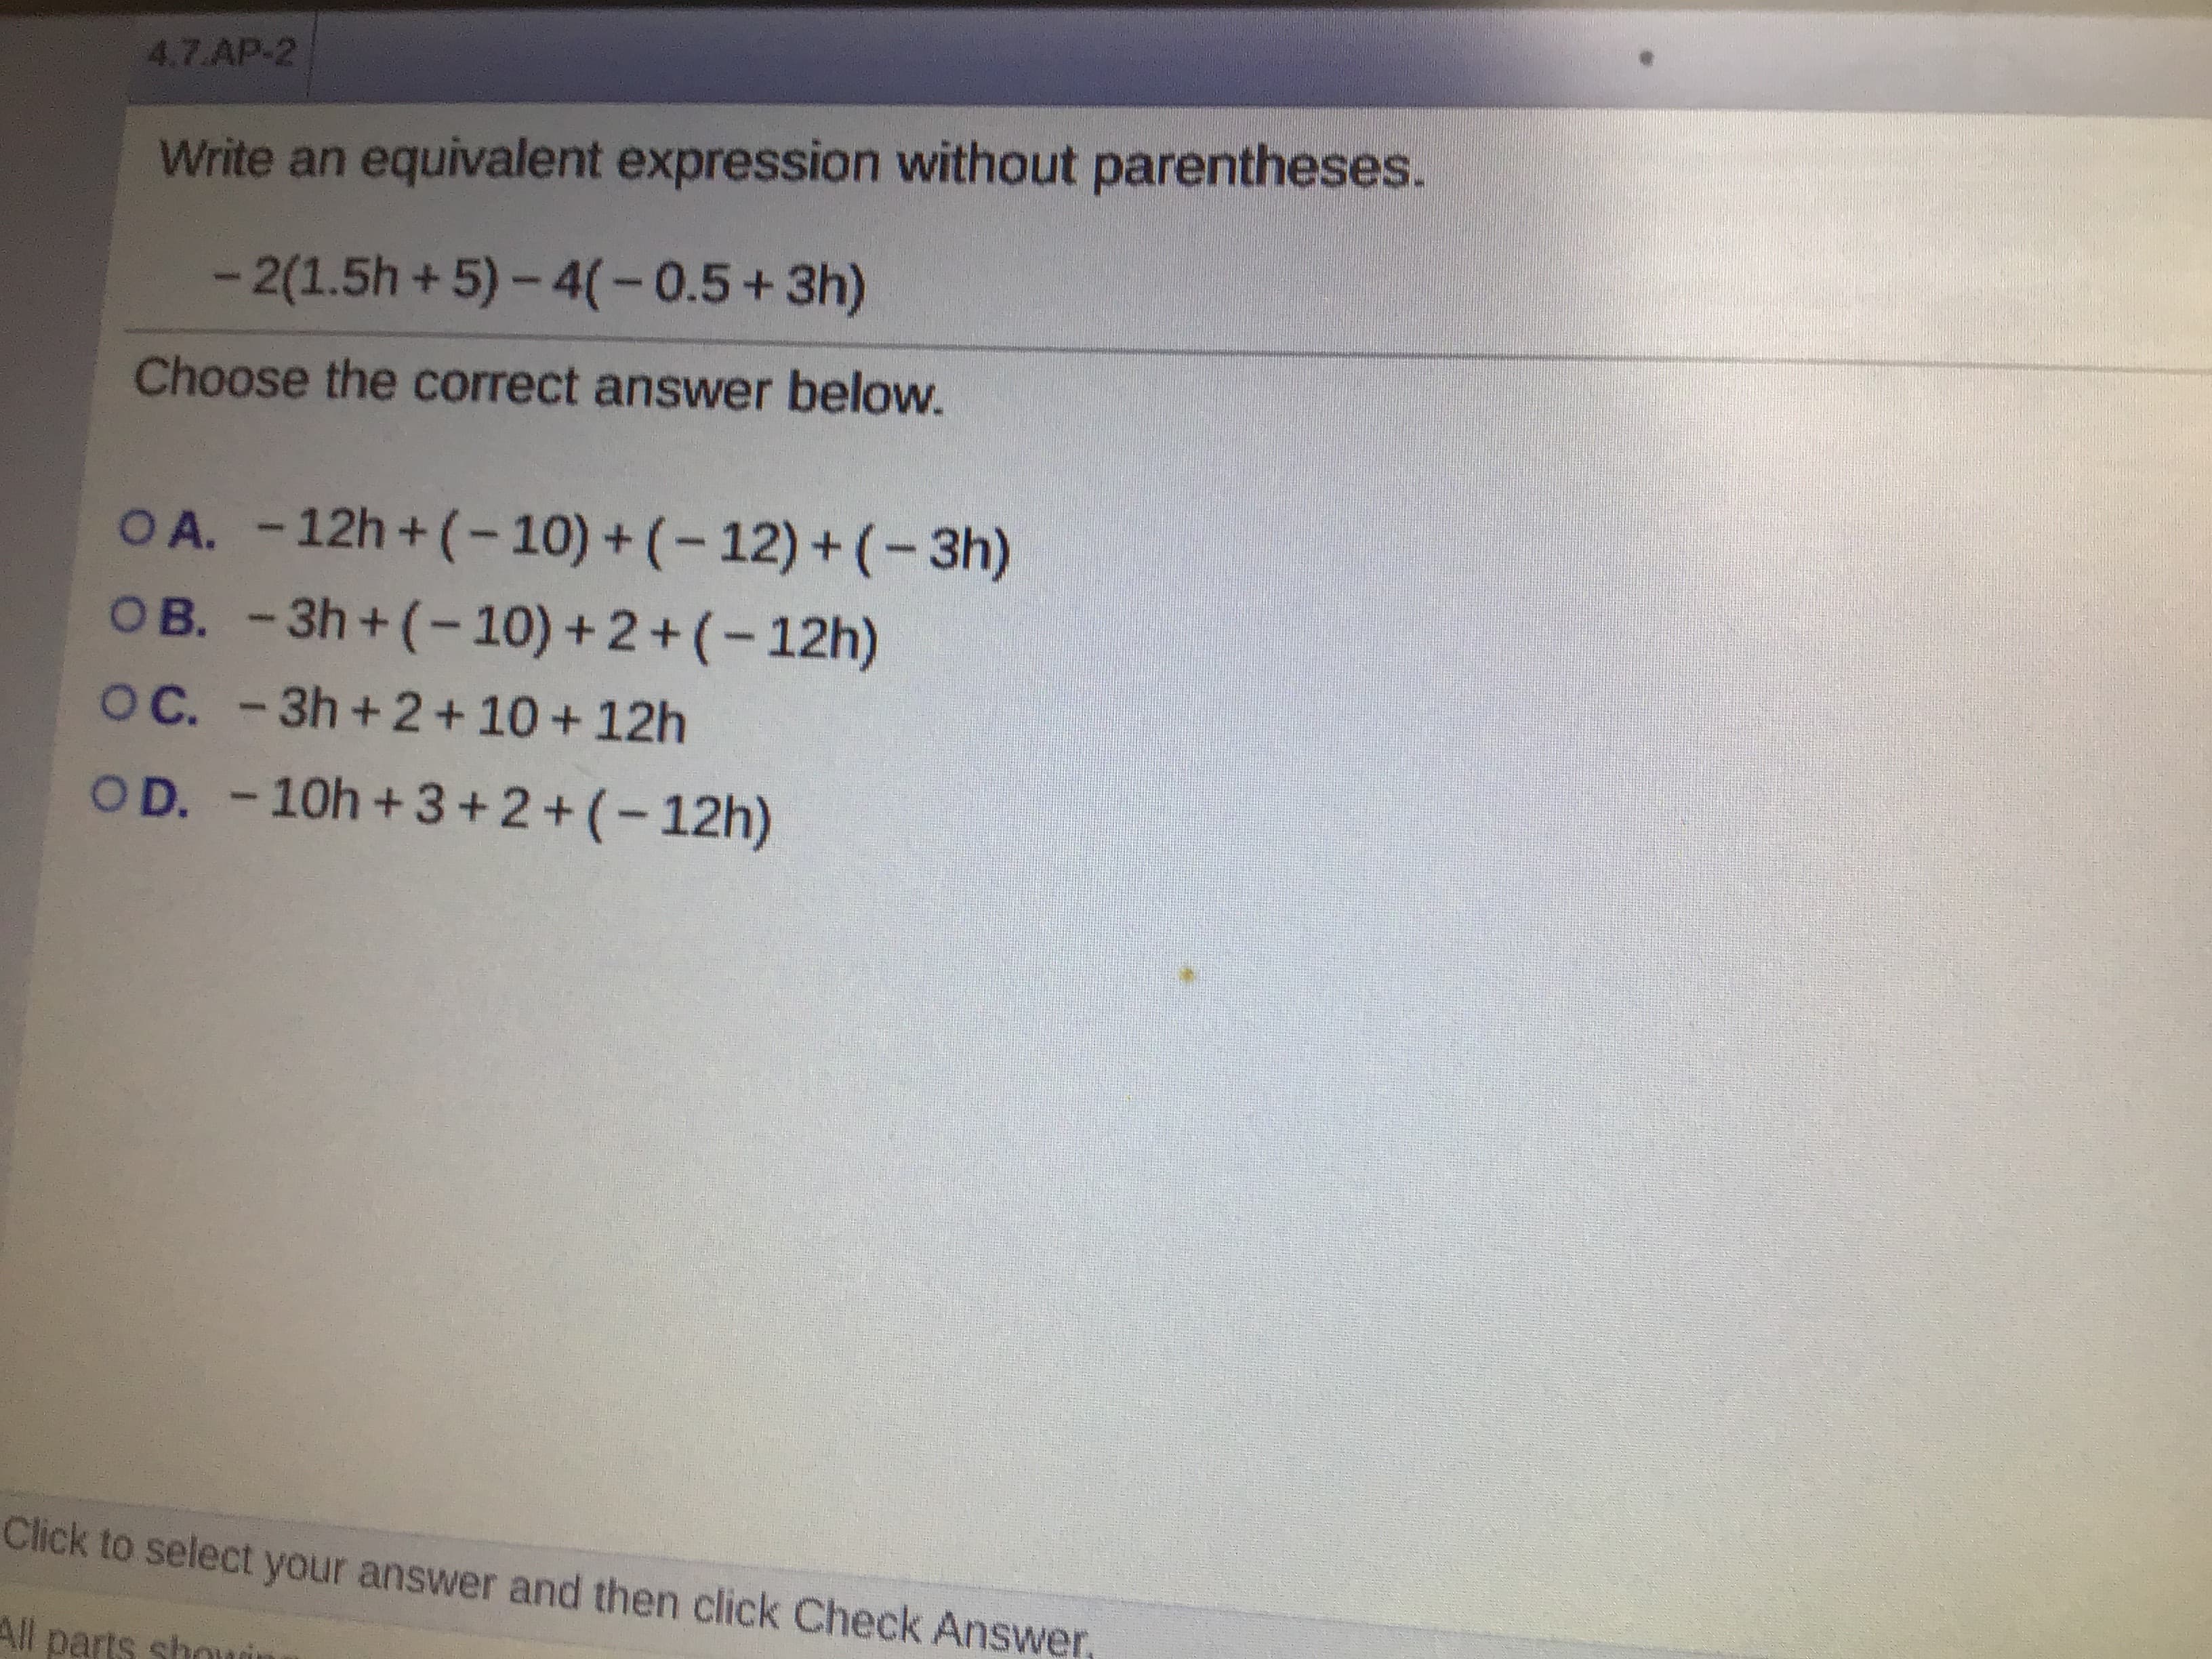 Write an equivalent expression without parentheses.
-2(1.5h +5)-4(-0.5+3h)
